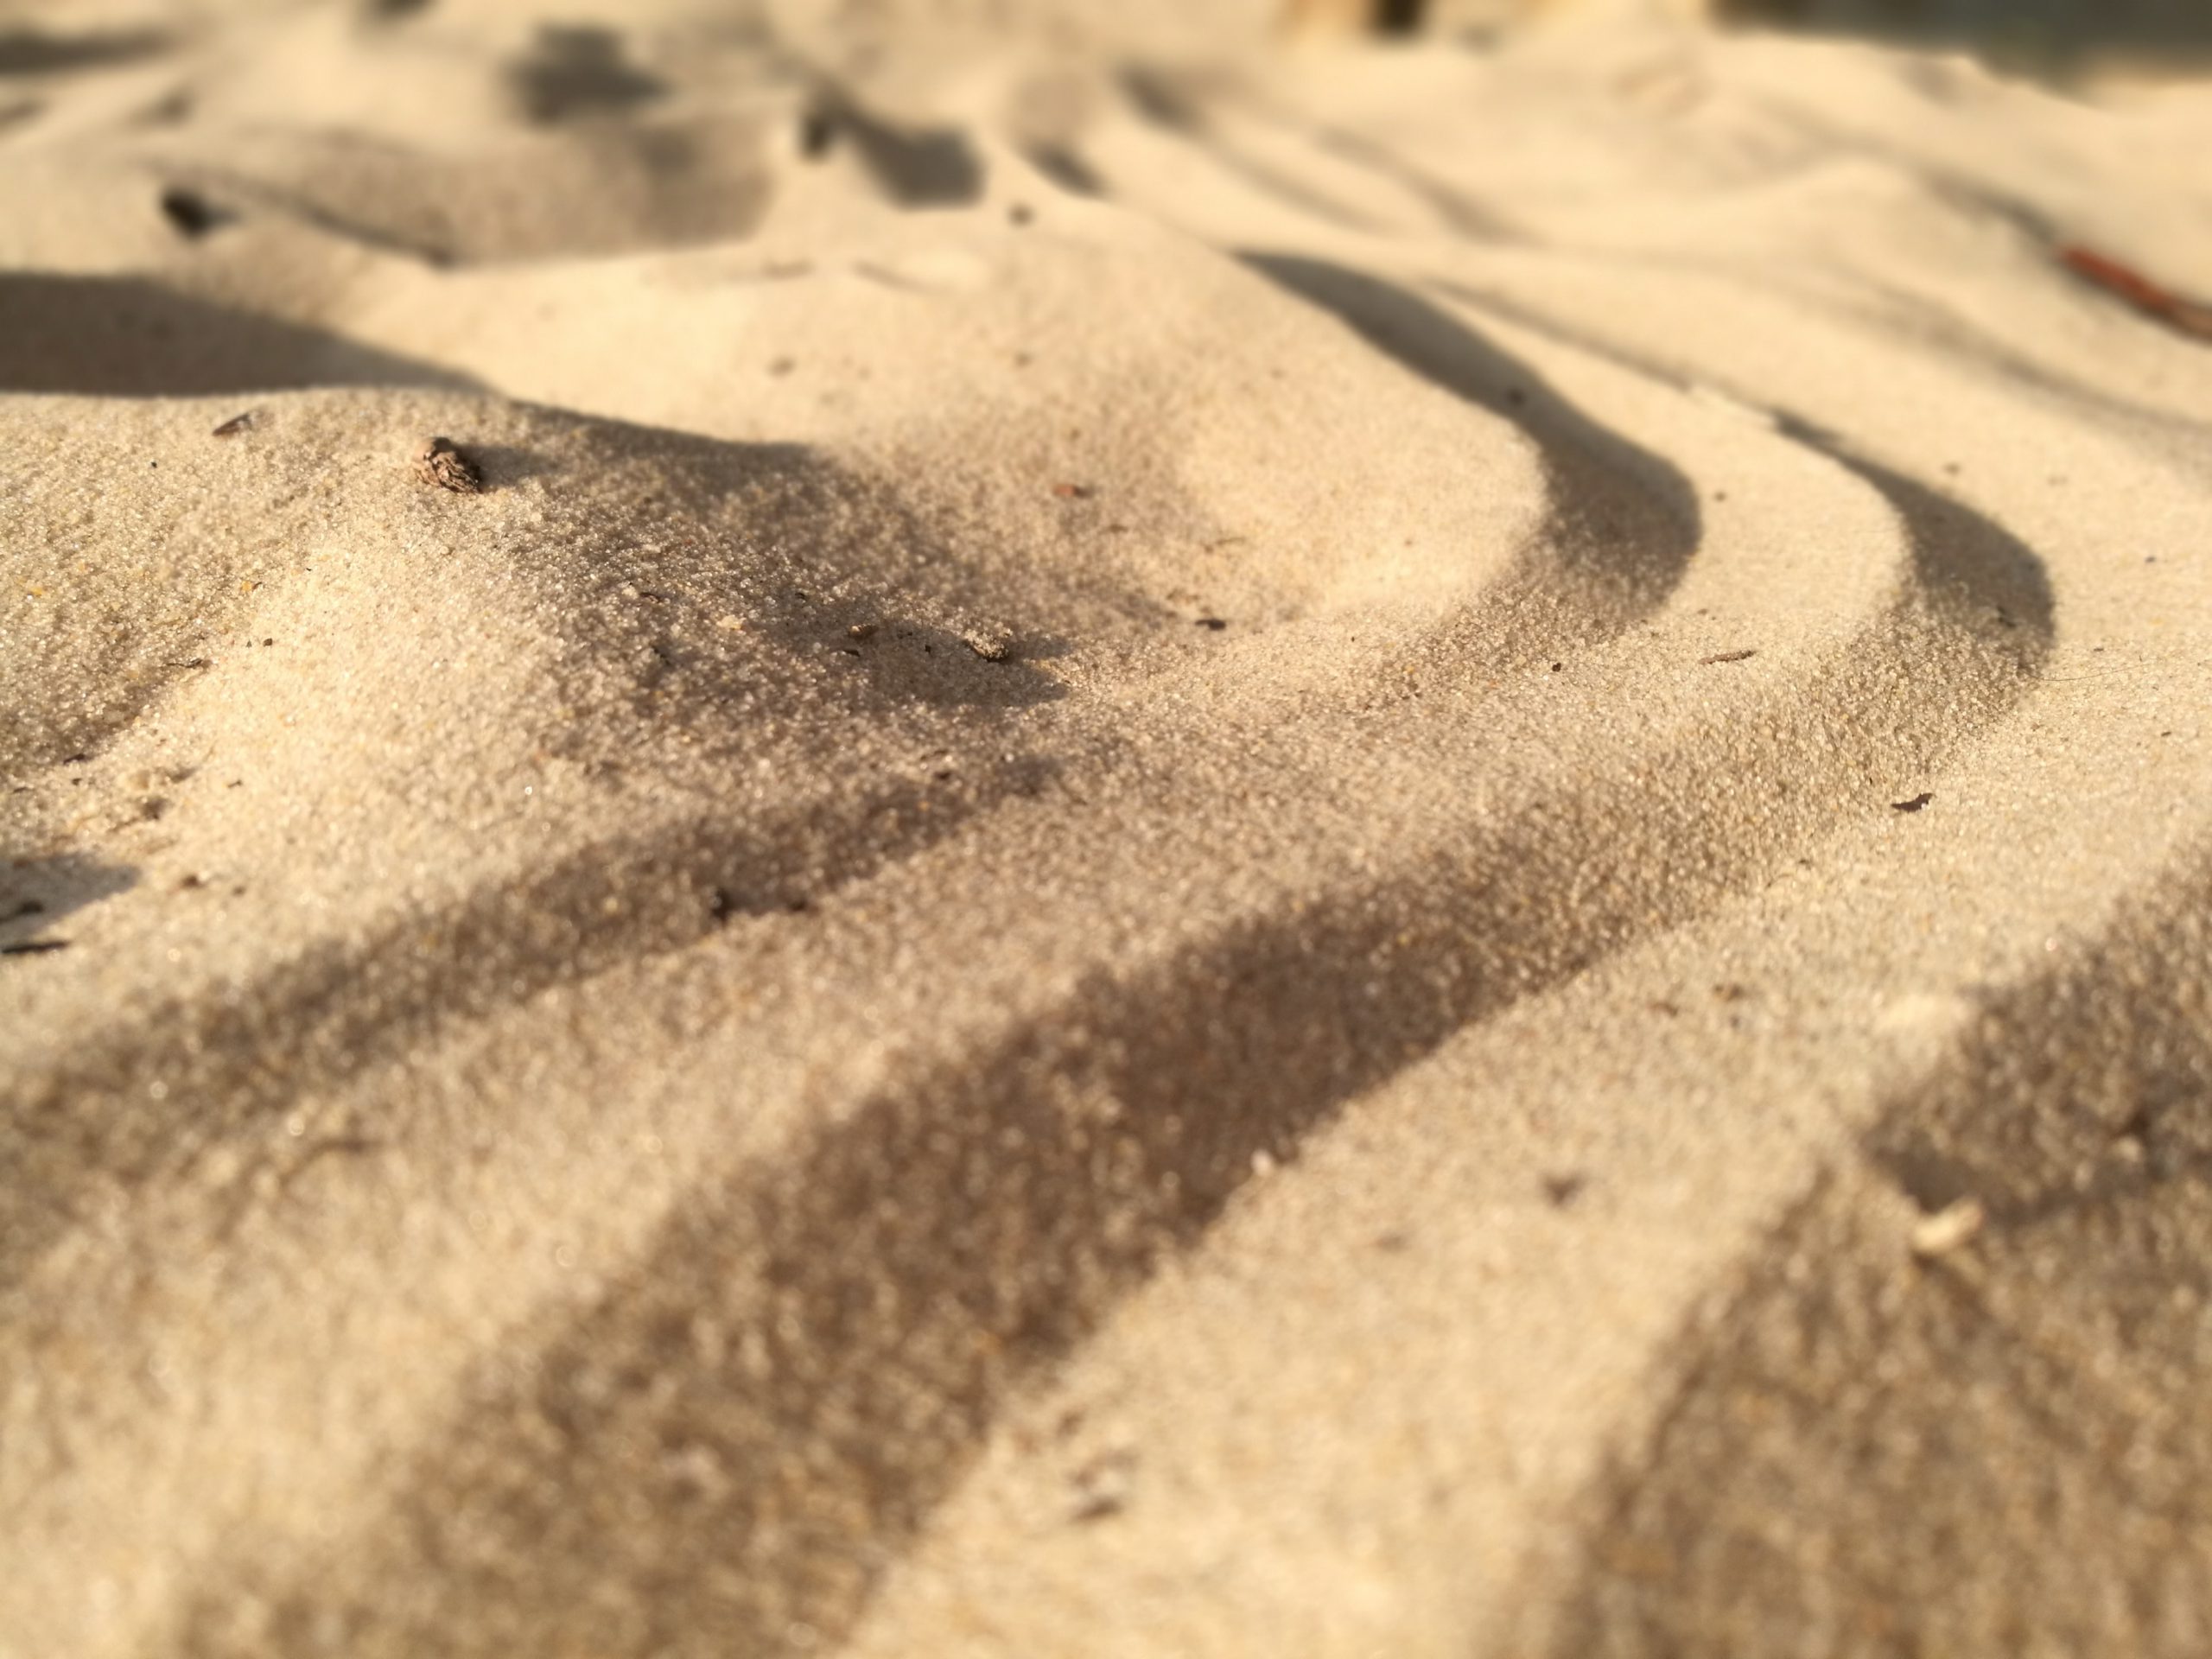 Dry sand with curvy vertical lines in it